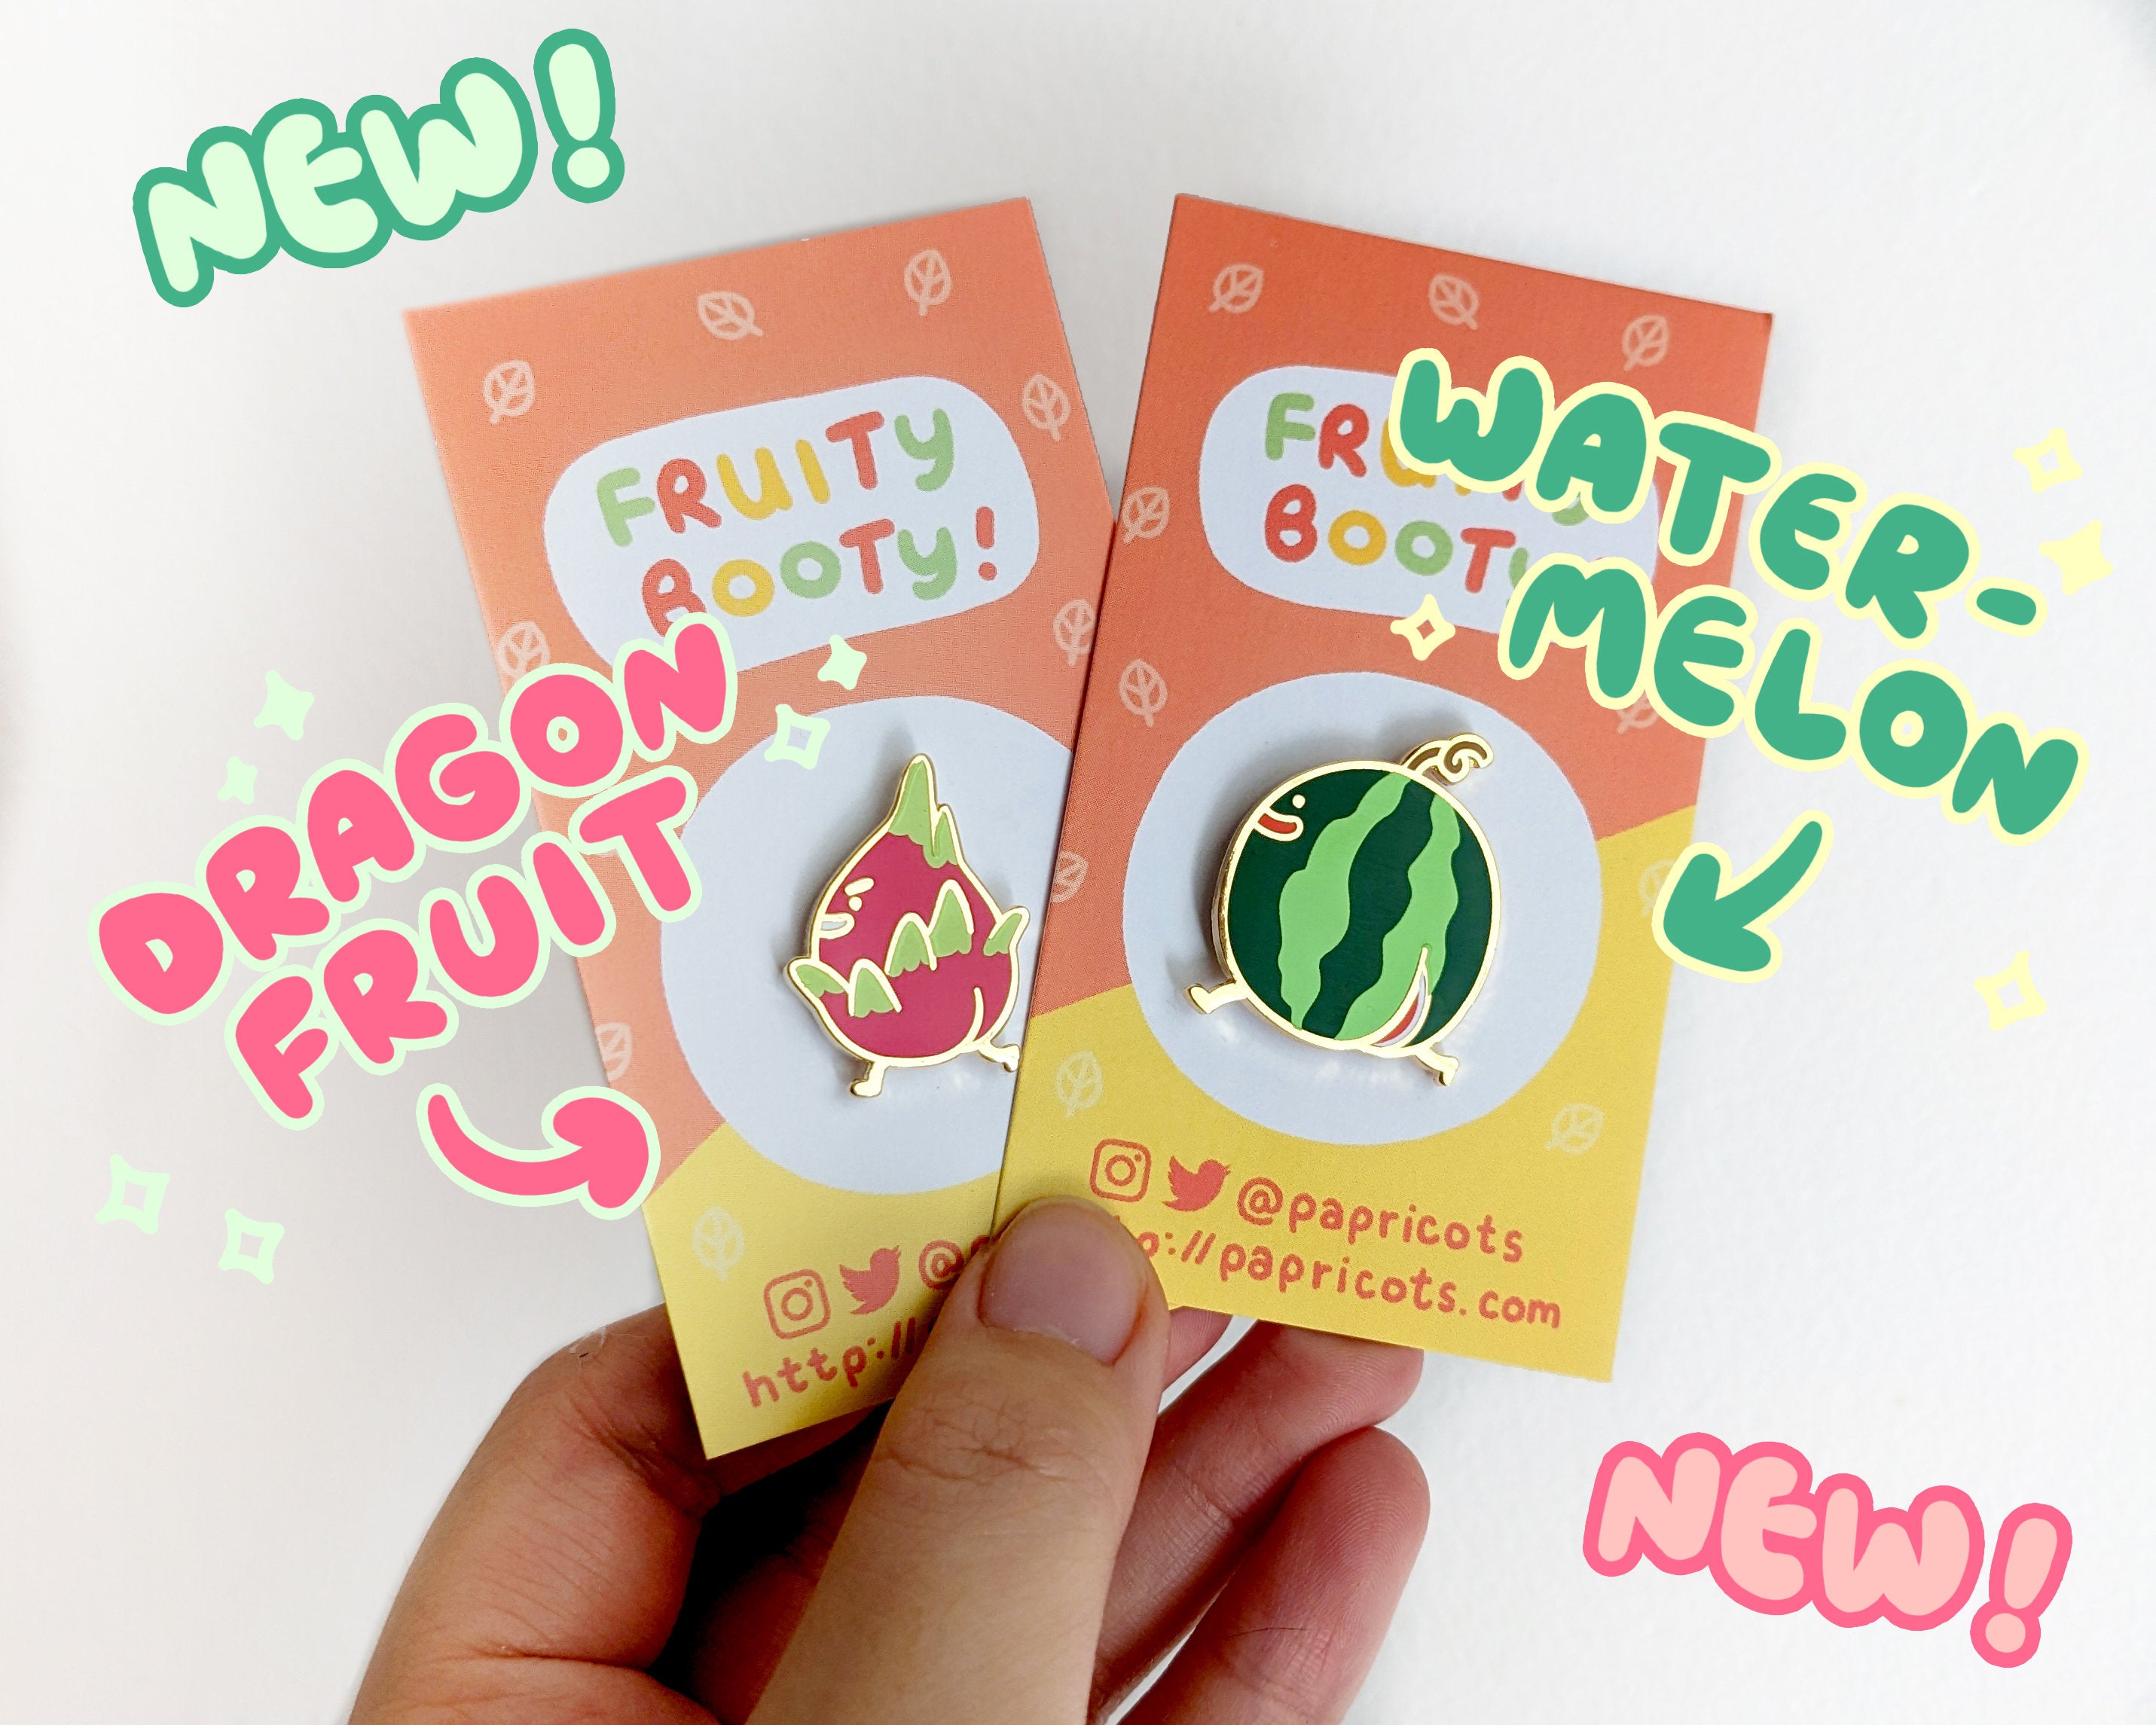 [Papricots] fruity booty enamel pins